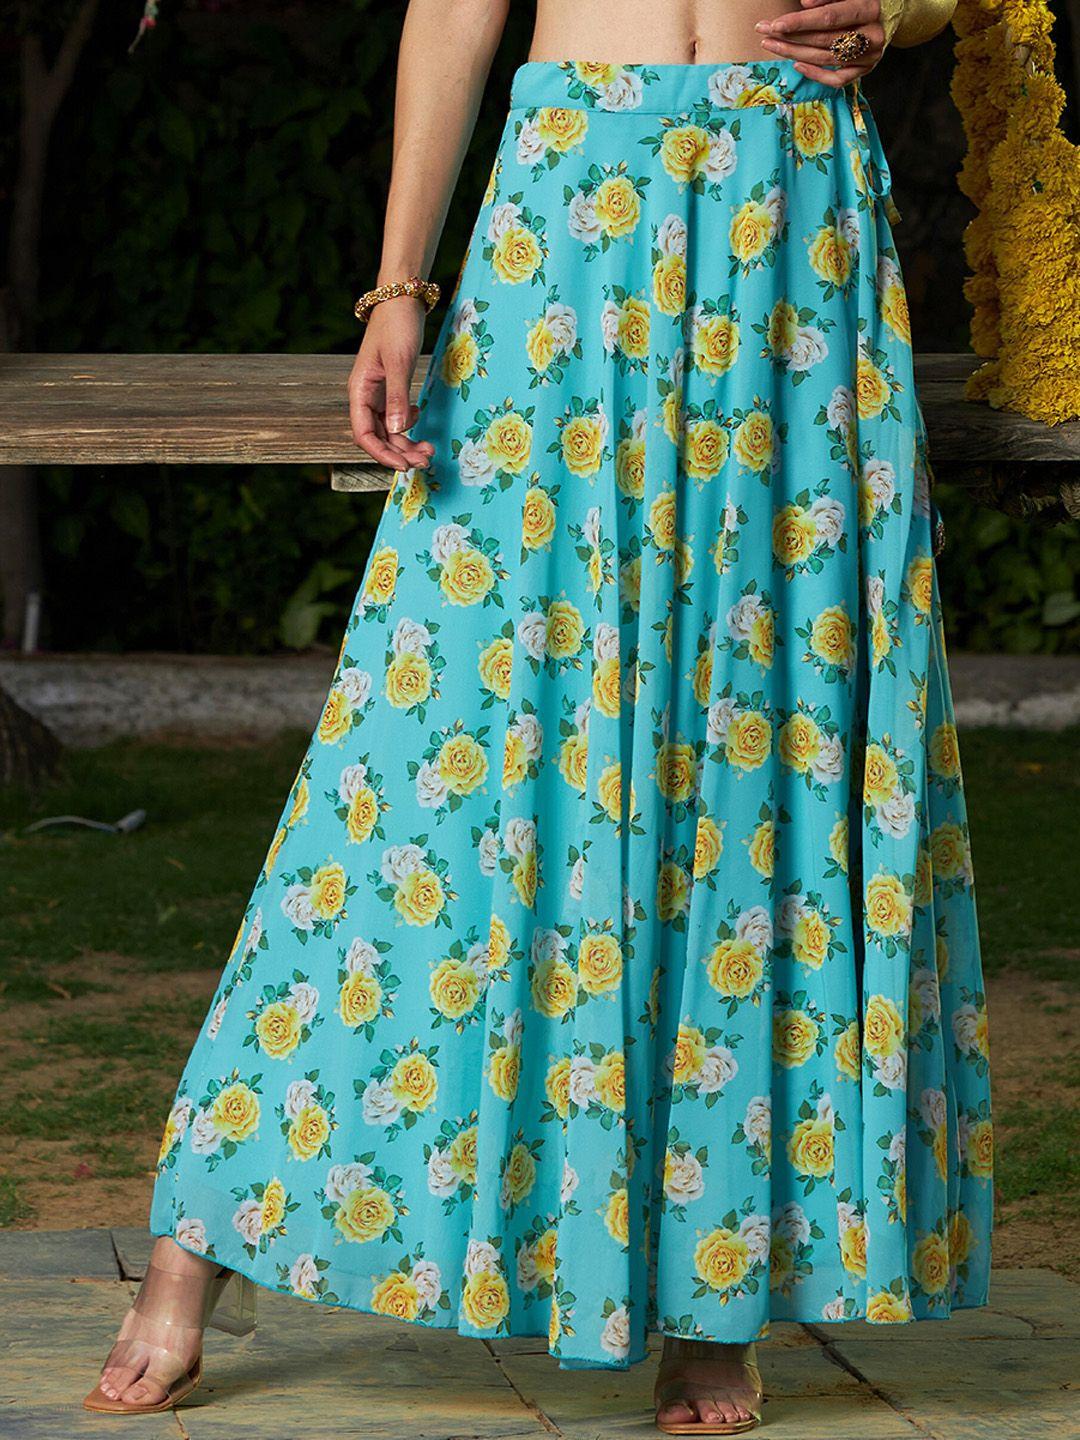 shae-by-sassafras-floral-printed-flared-maxi-skirt